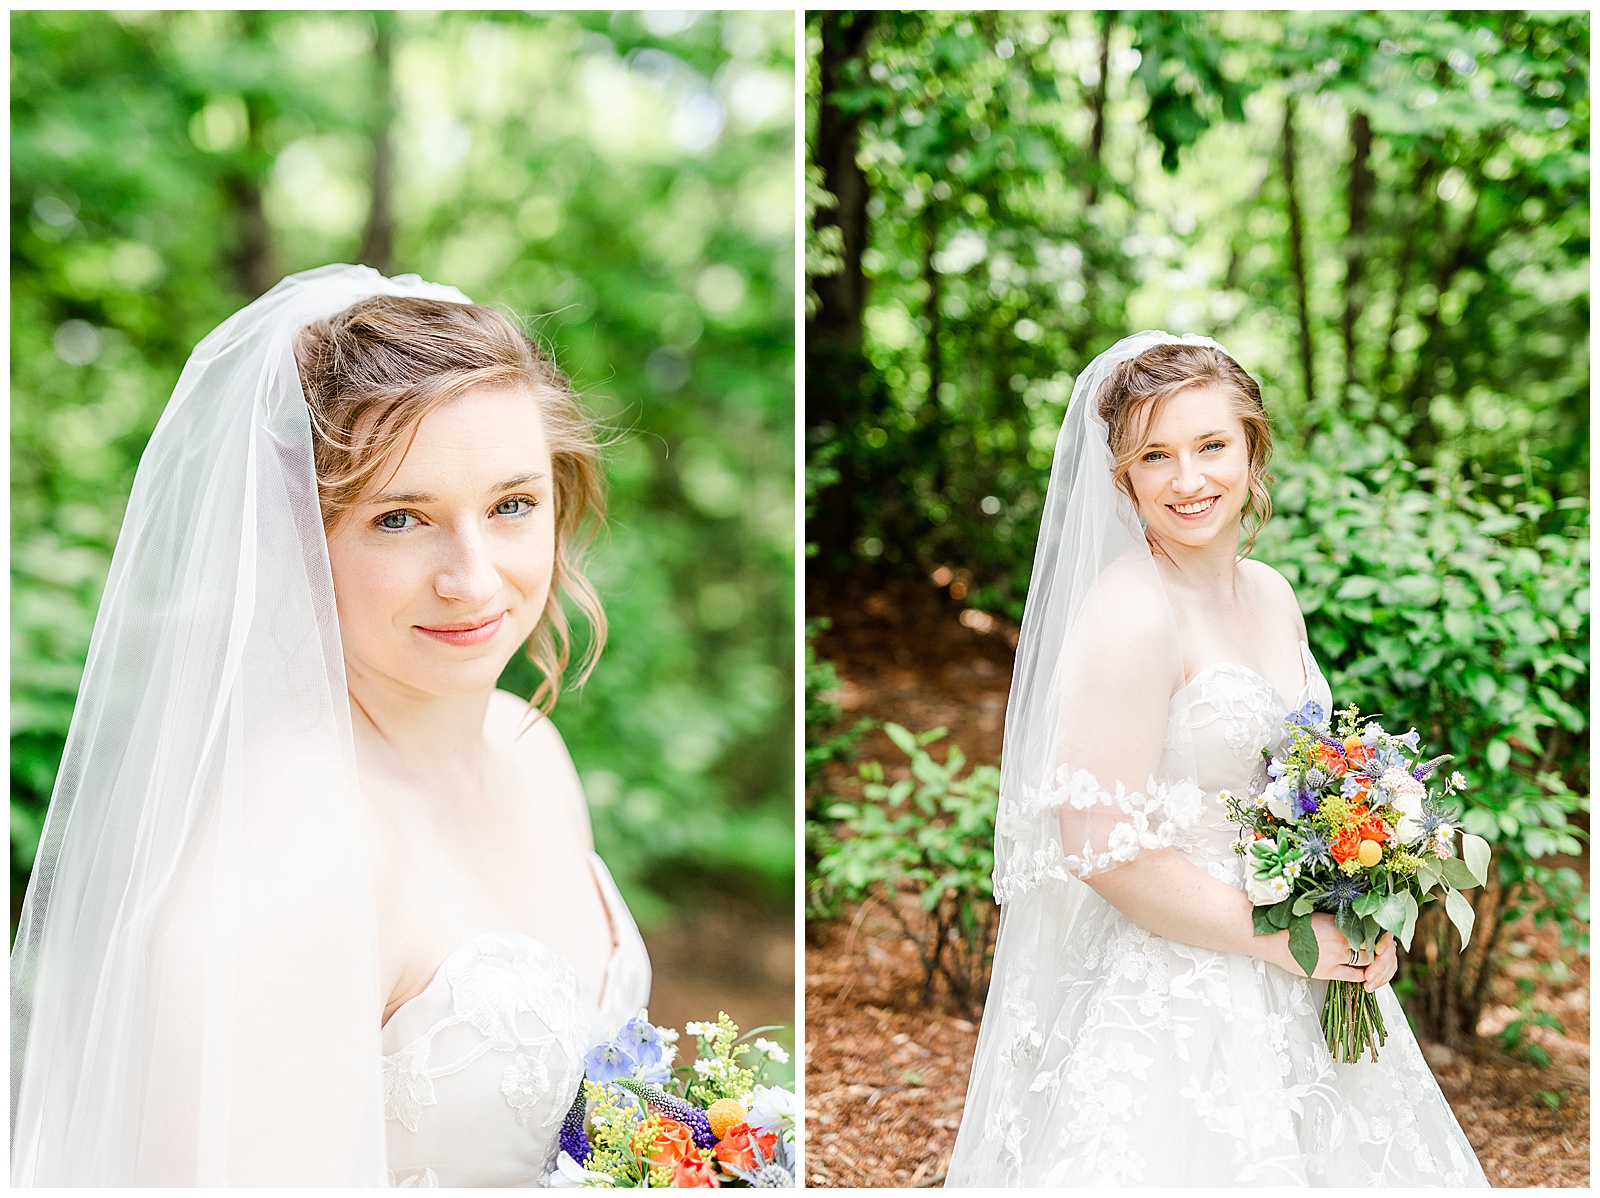 forest location 👰 Bride: lace wedding dress + veil 💐 Colorful orange and blue bouquet 📸 Outdoorsy Lake and Mountain Bridal Session with Julia | Kevyn Dixon Photography